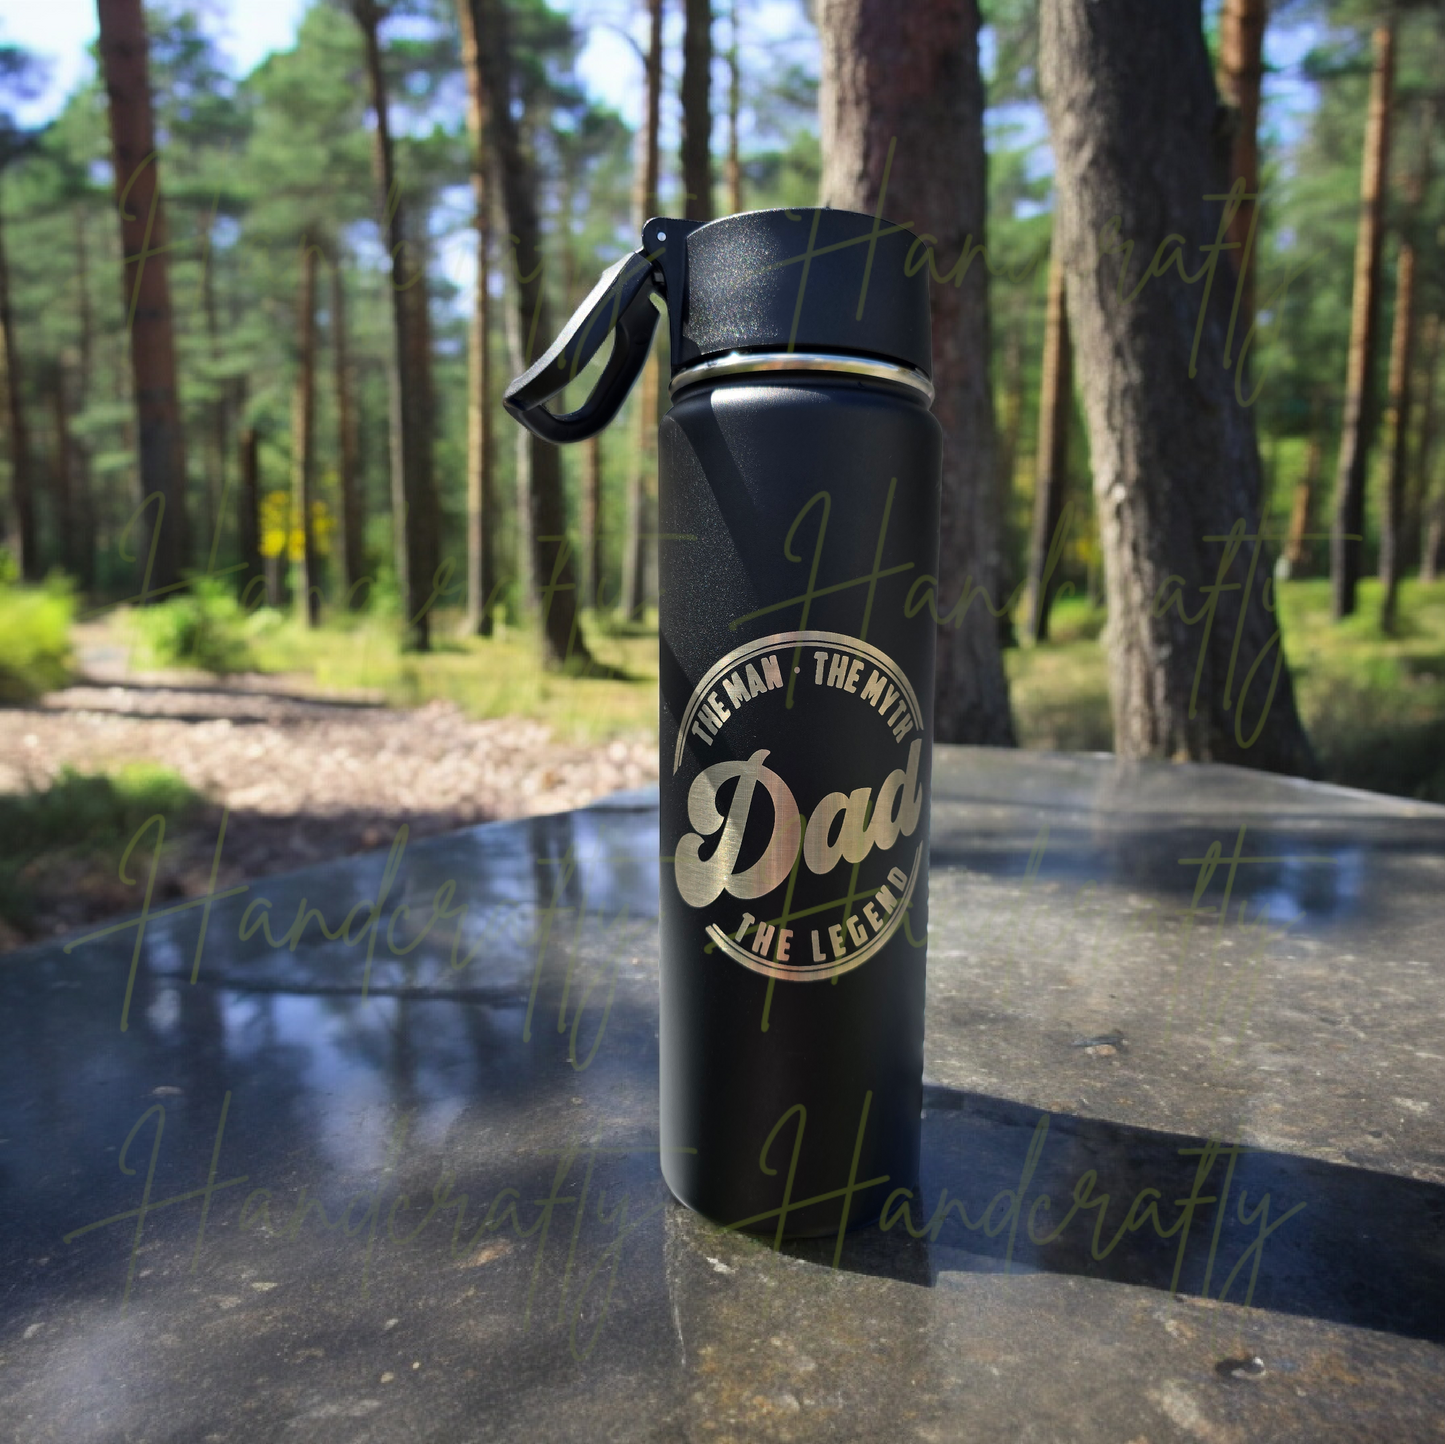 Father's Day water bottle, Father's Day gifts, Insulated water bottle for Dad, Stainless steel water bottle for Dad, Double wall water bottle for Dad, Powder coated water bottle for Dad, Double wall insulated water bottle, Vacuum insulated water bottl, Laser engraved water bottle, Durable BPA-free water bottle, Leak-proof water bottle, Spill-proof water bottle, Thermal water bottle for Dad, Best Dad water bottle, World's Best Dad water bottle, Super Dad water bottle, #1 Dad water bottle